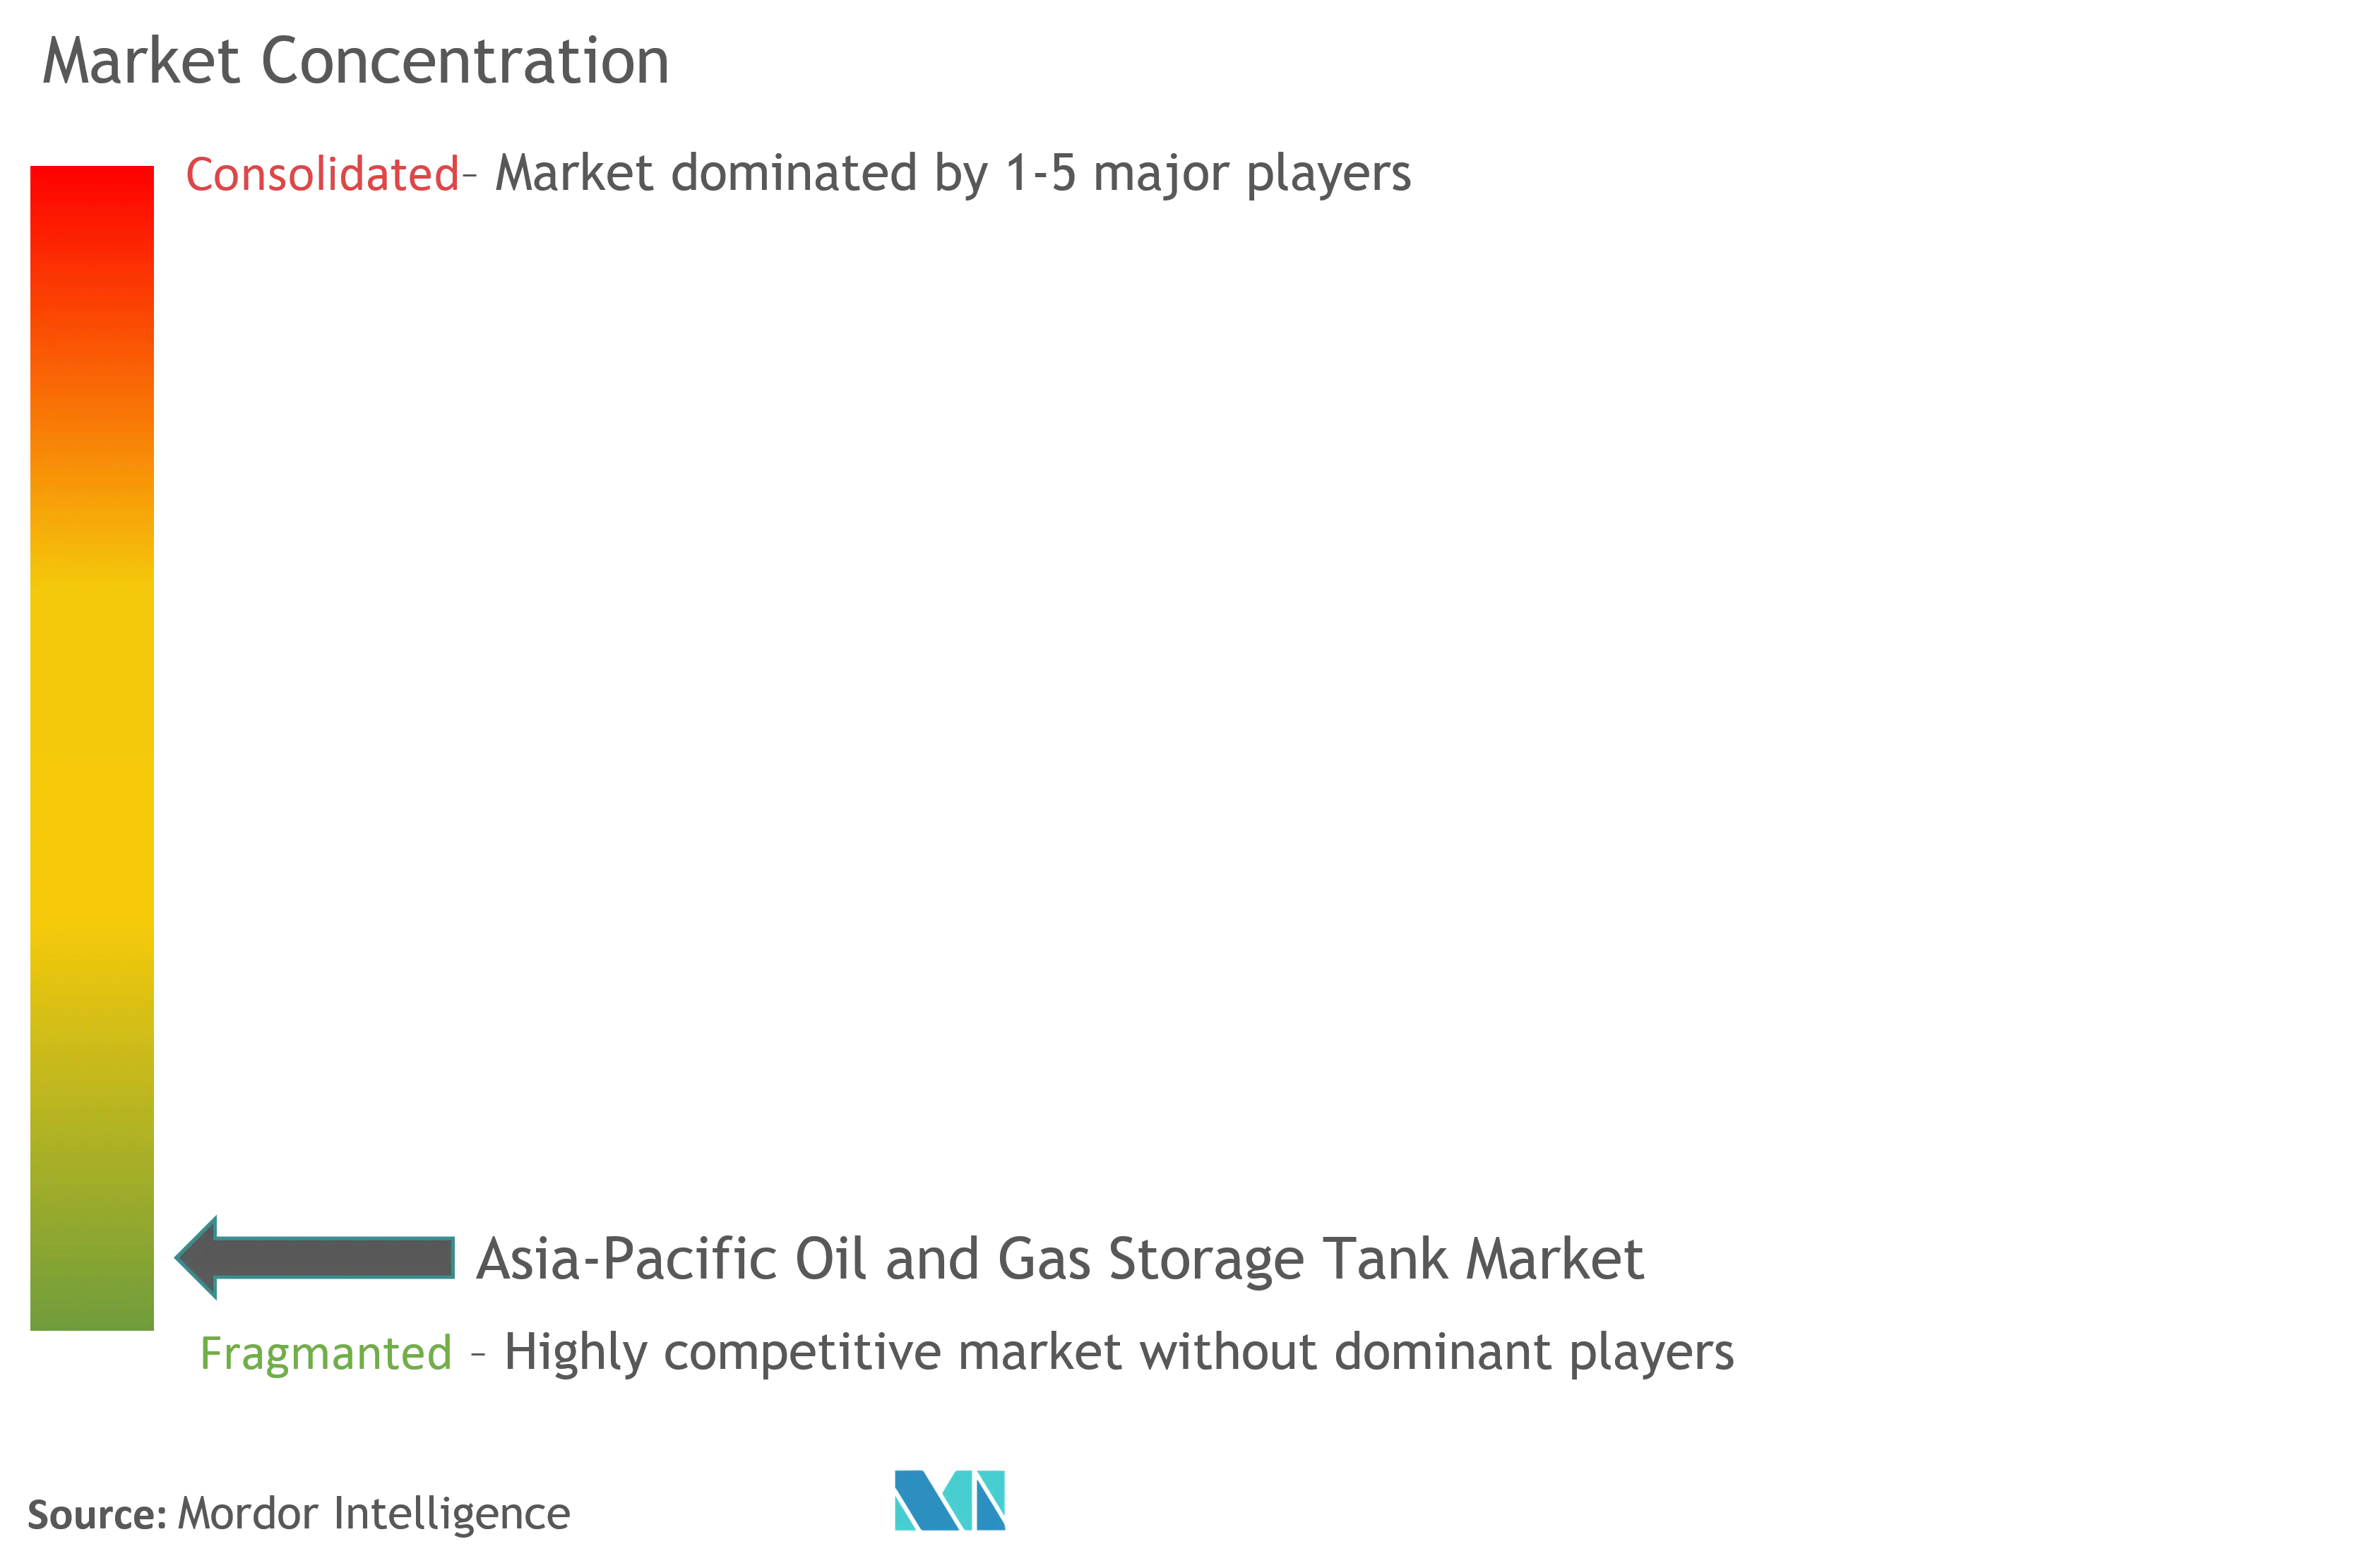 Asia-Pacific Oil and Gas Storage Tank Market Concentration